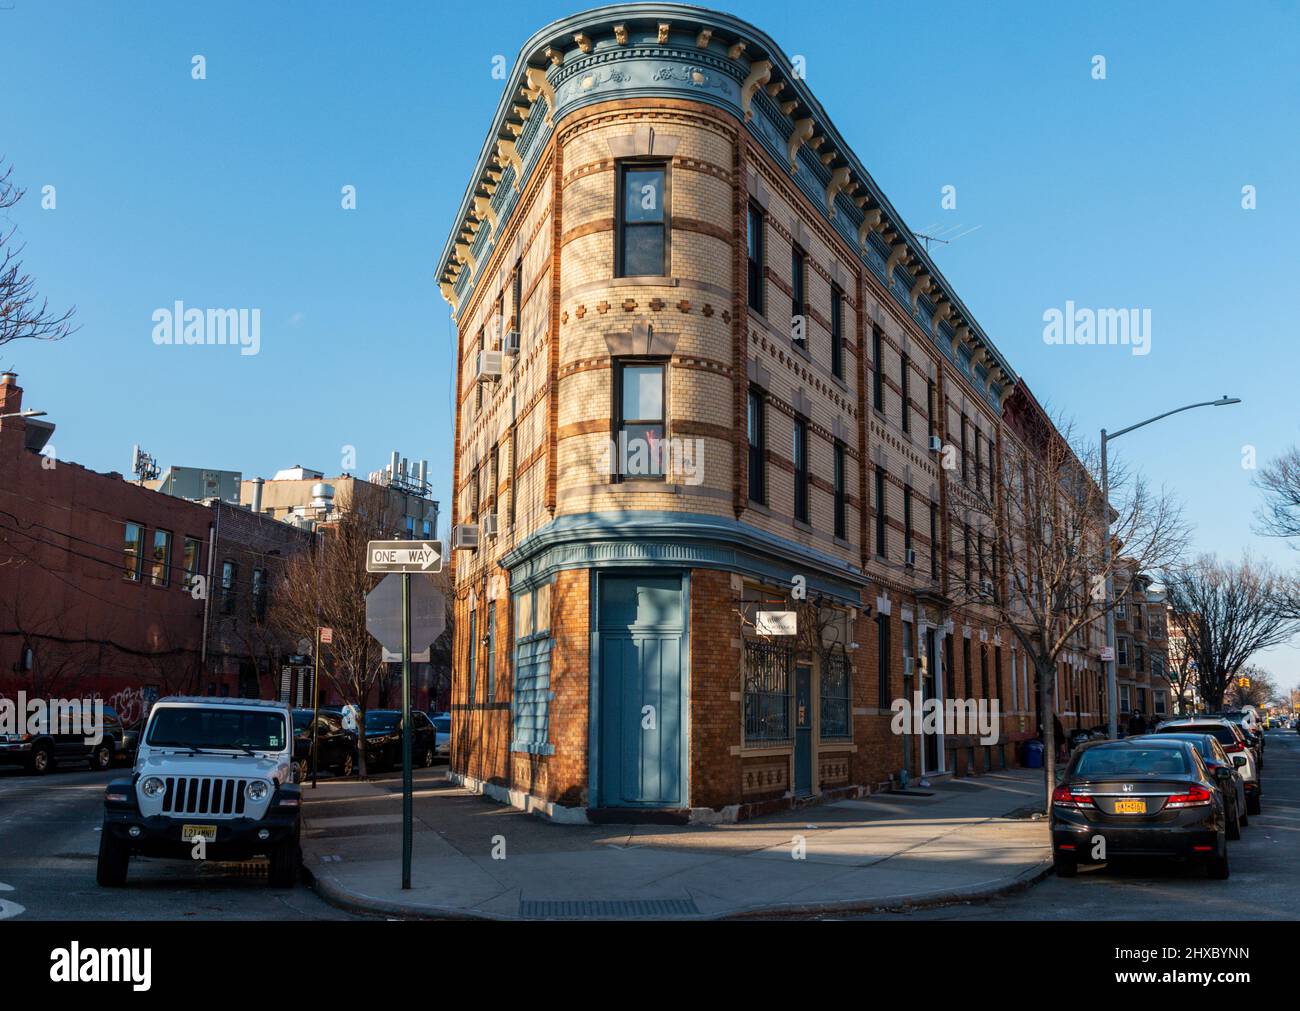 Astoria, Queens, USA - 27 February 2022: A small flatiron building on the corner of Newtown Rd and 41st in Astoria Queens. Stock Photo